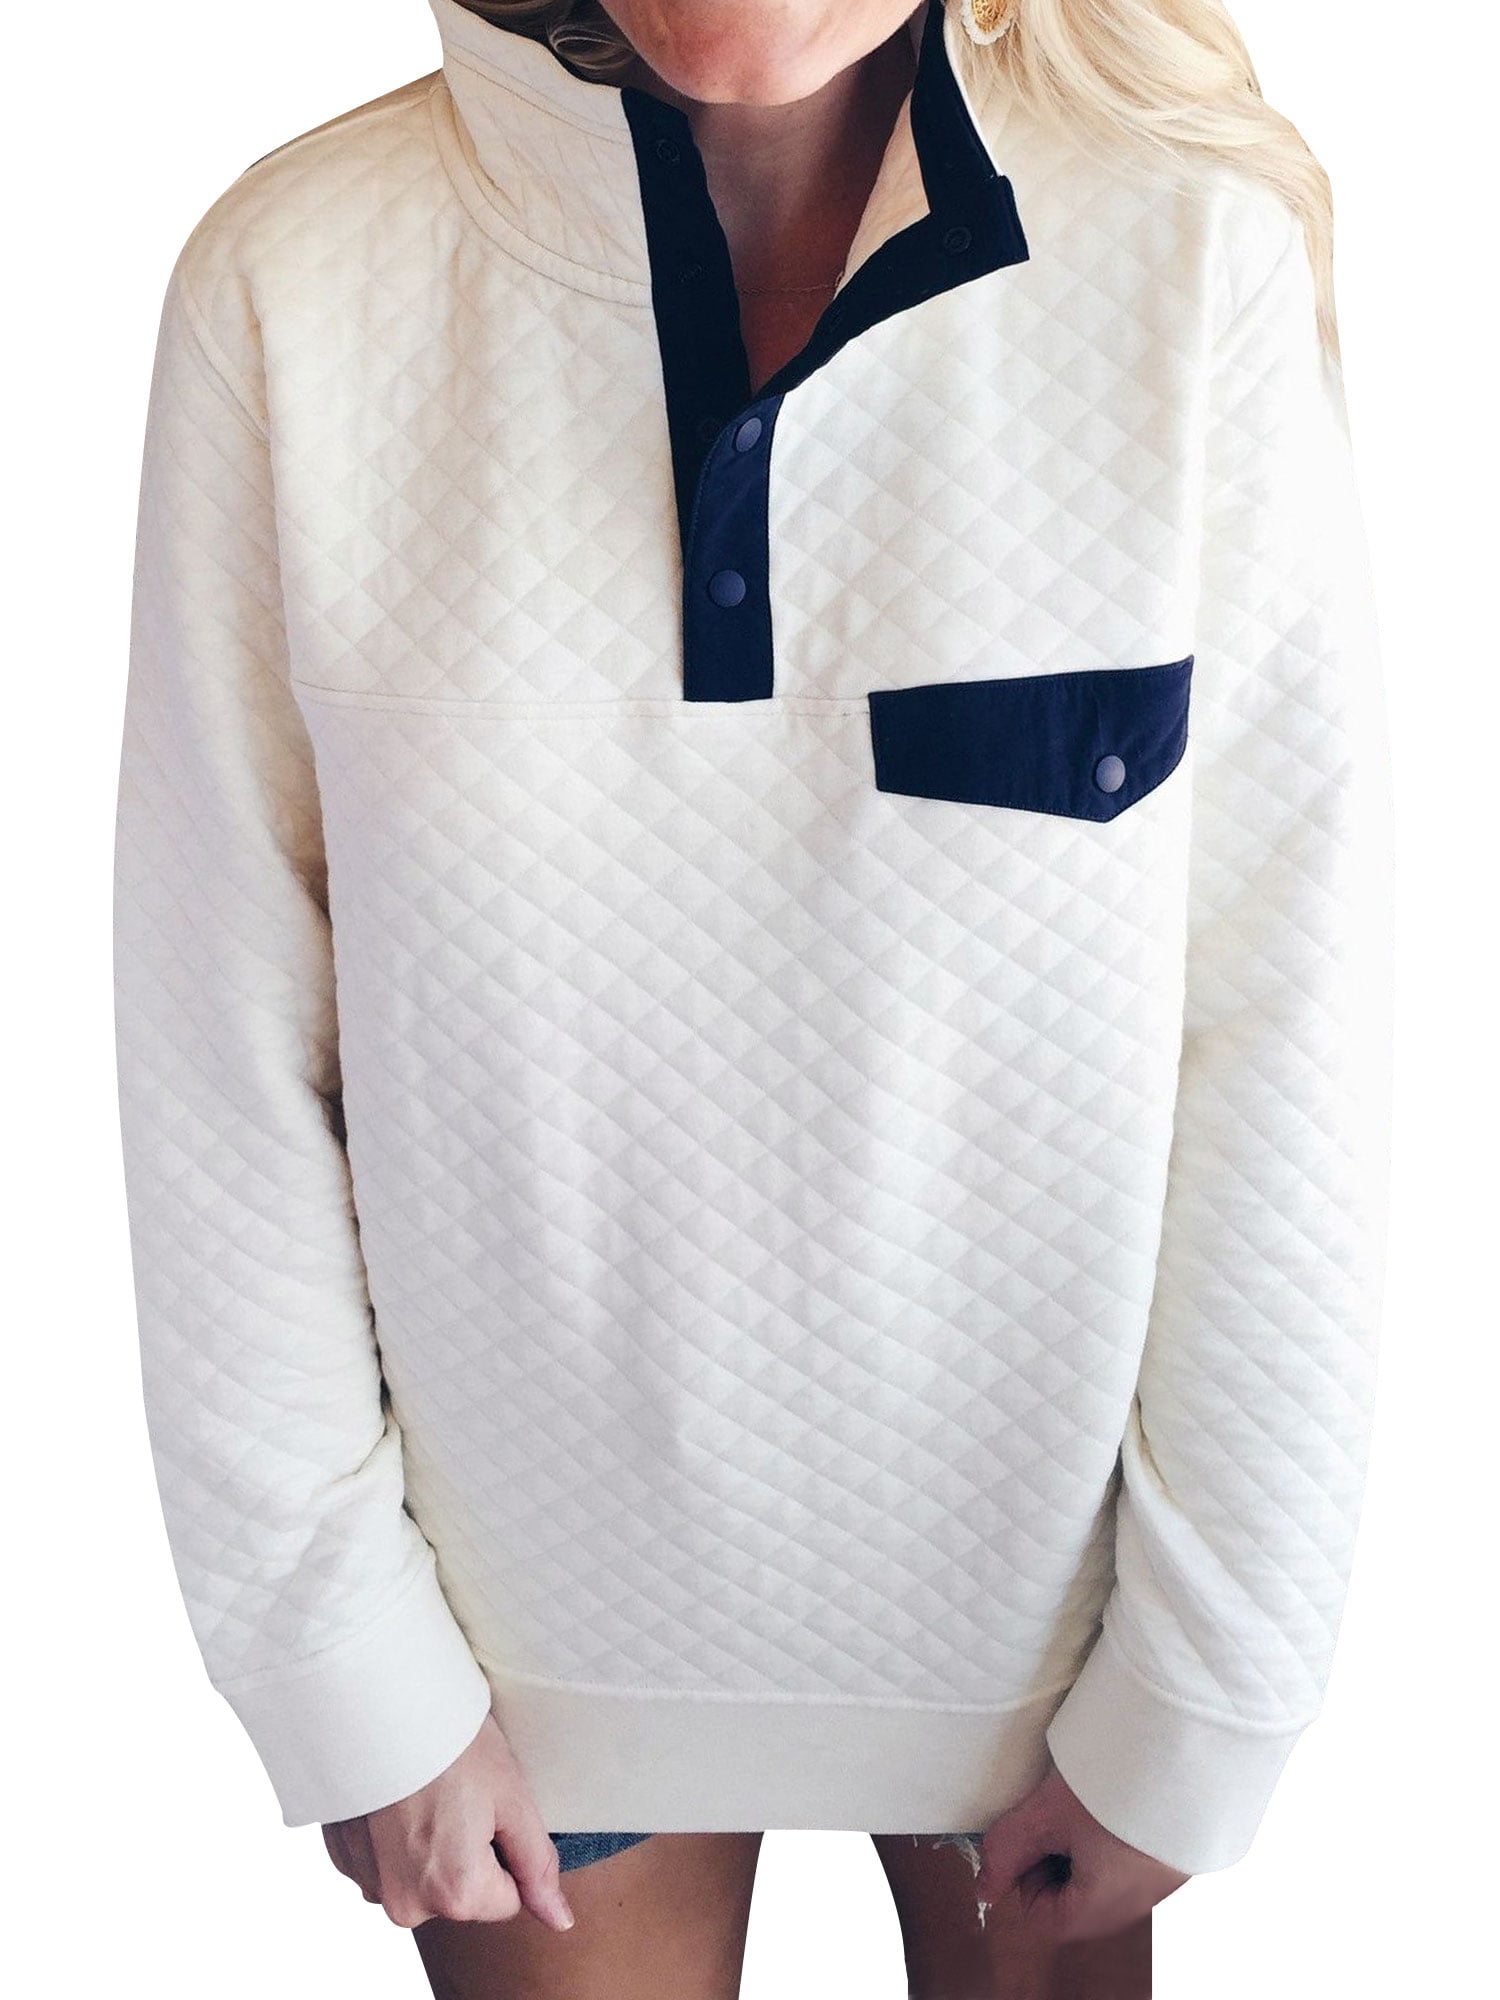 Buy > sweatshirt and button up > in stock